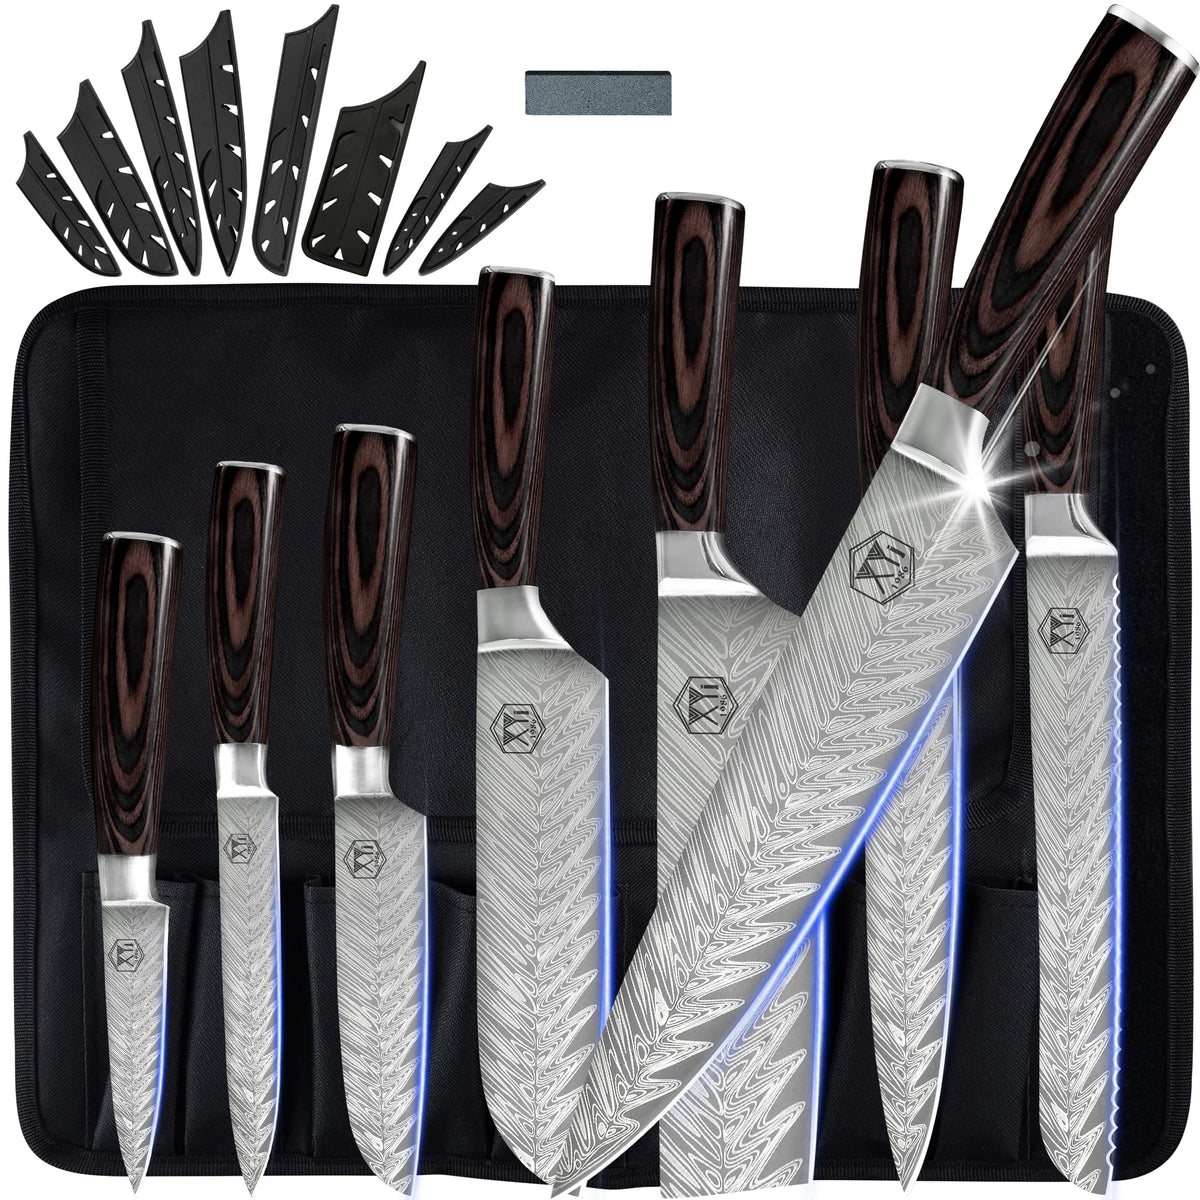 CHUYIREN Chef Knife Set of 8, Professional Kitchen Knife Set for Daily Use, High Carbon Steel Culinary Knives Set for Household Blade Length Varies